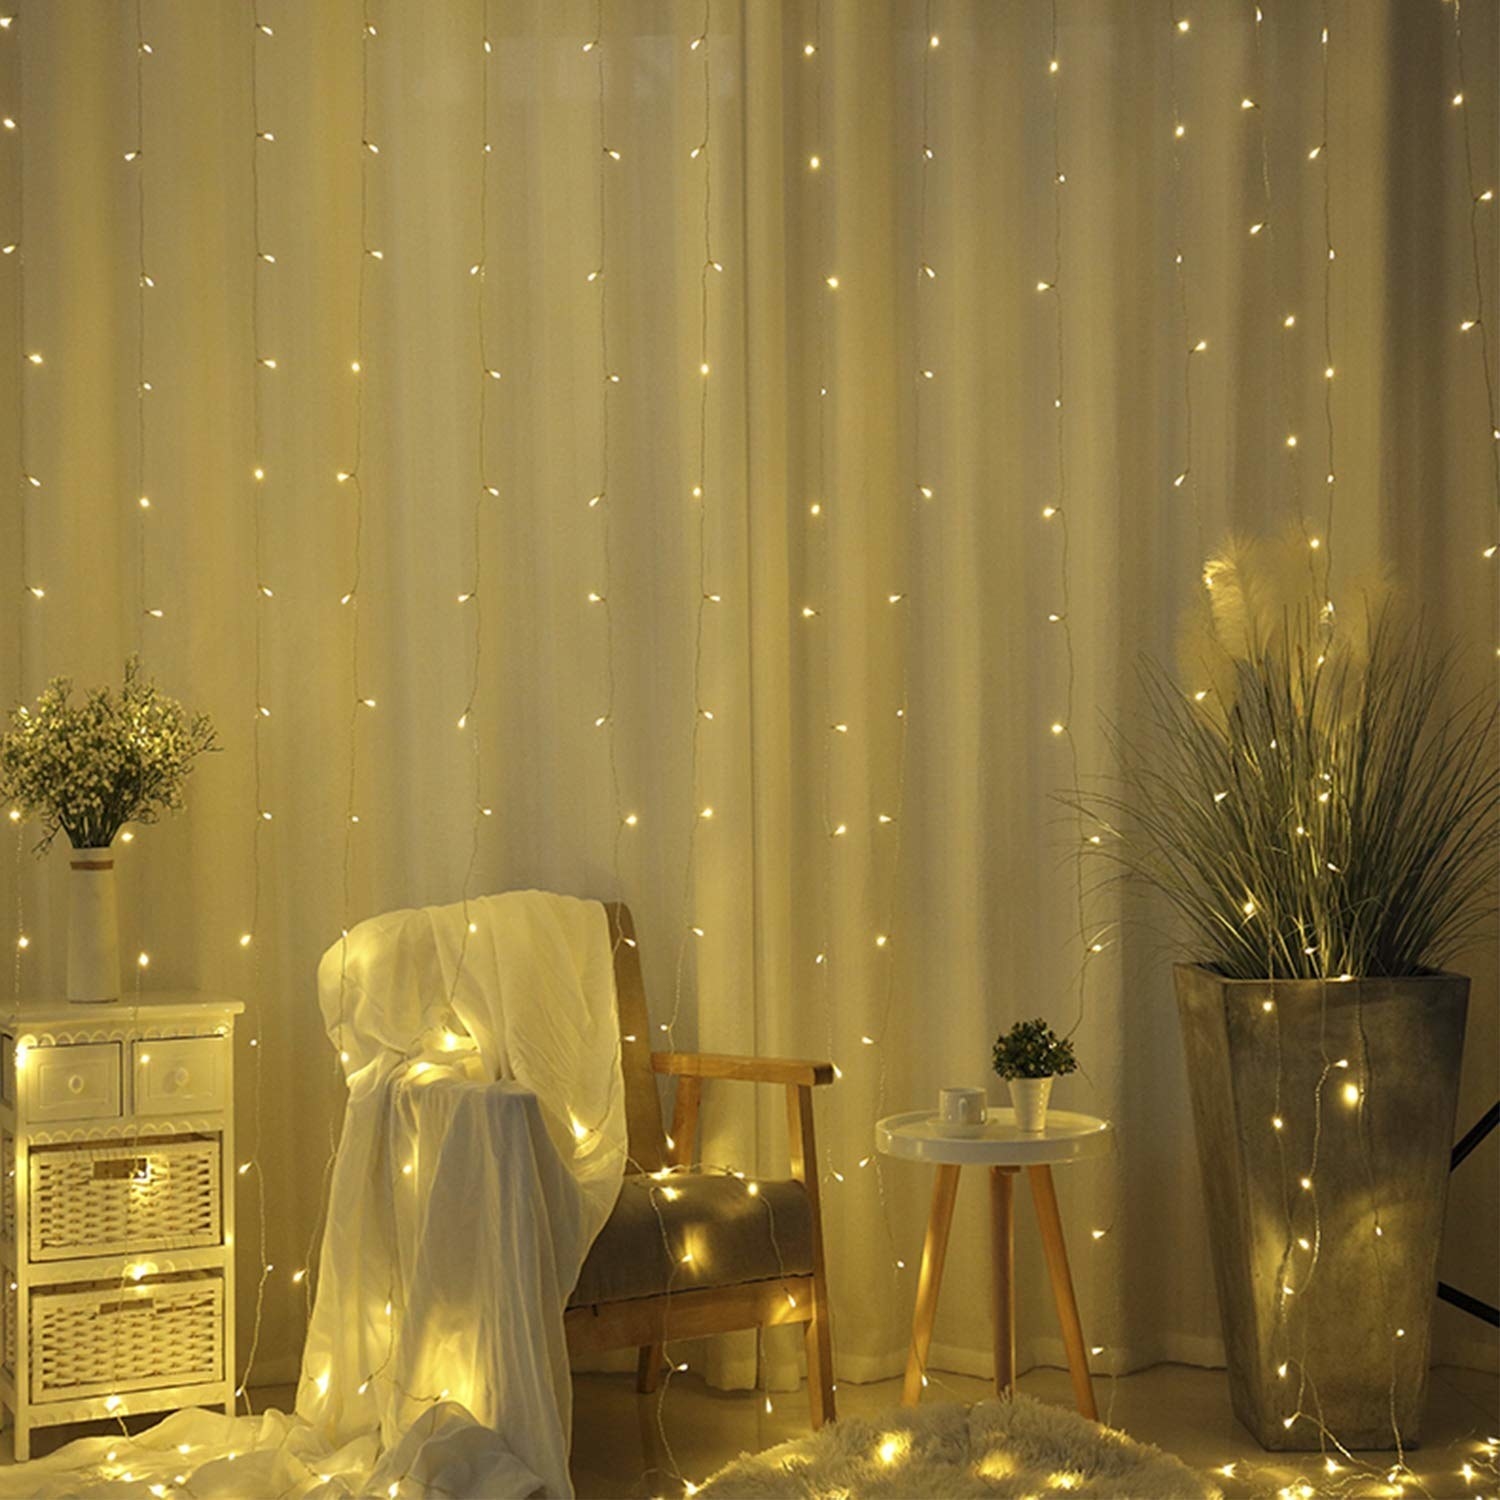 Fairy lights draped over chairs and tables